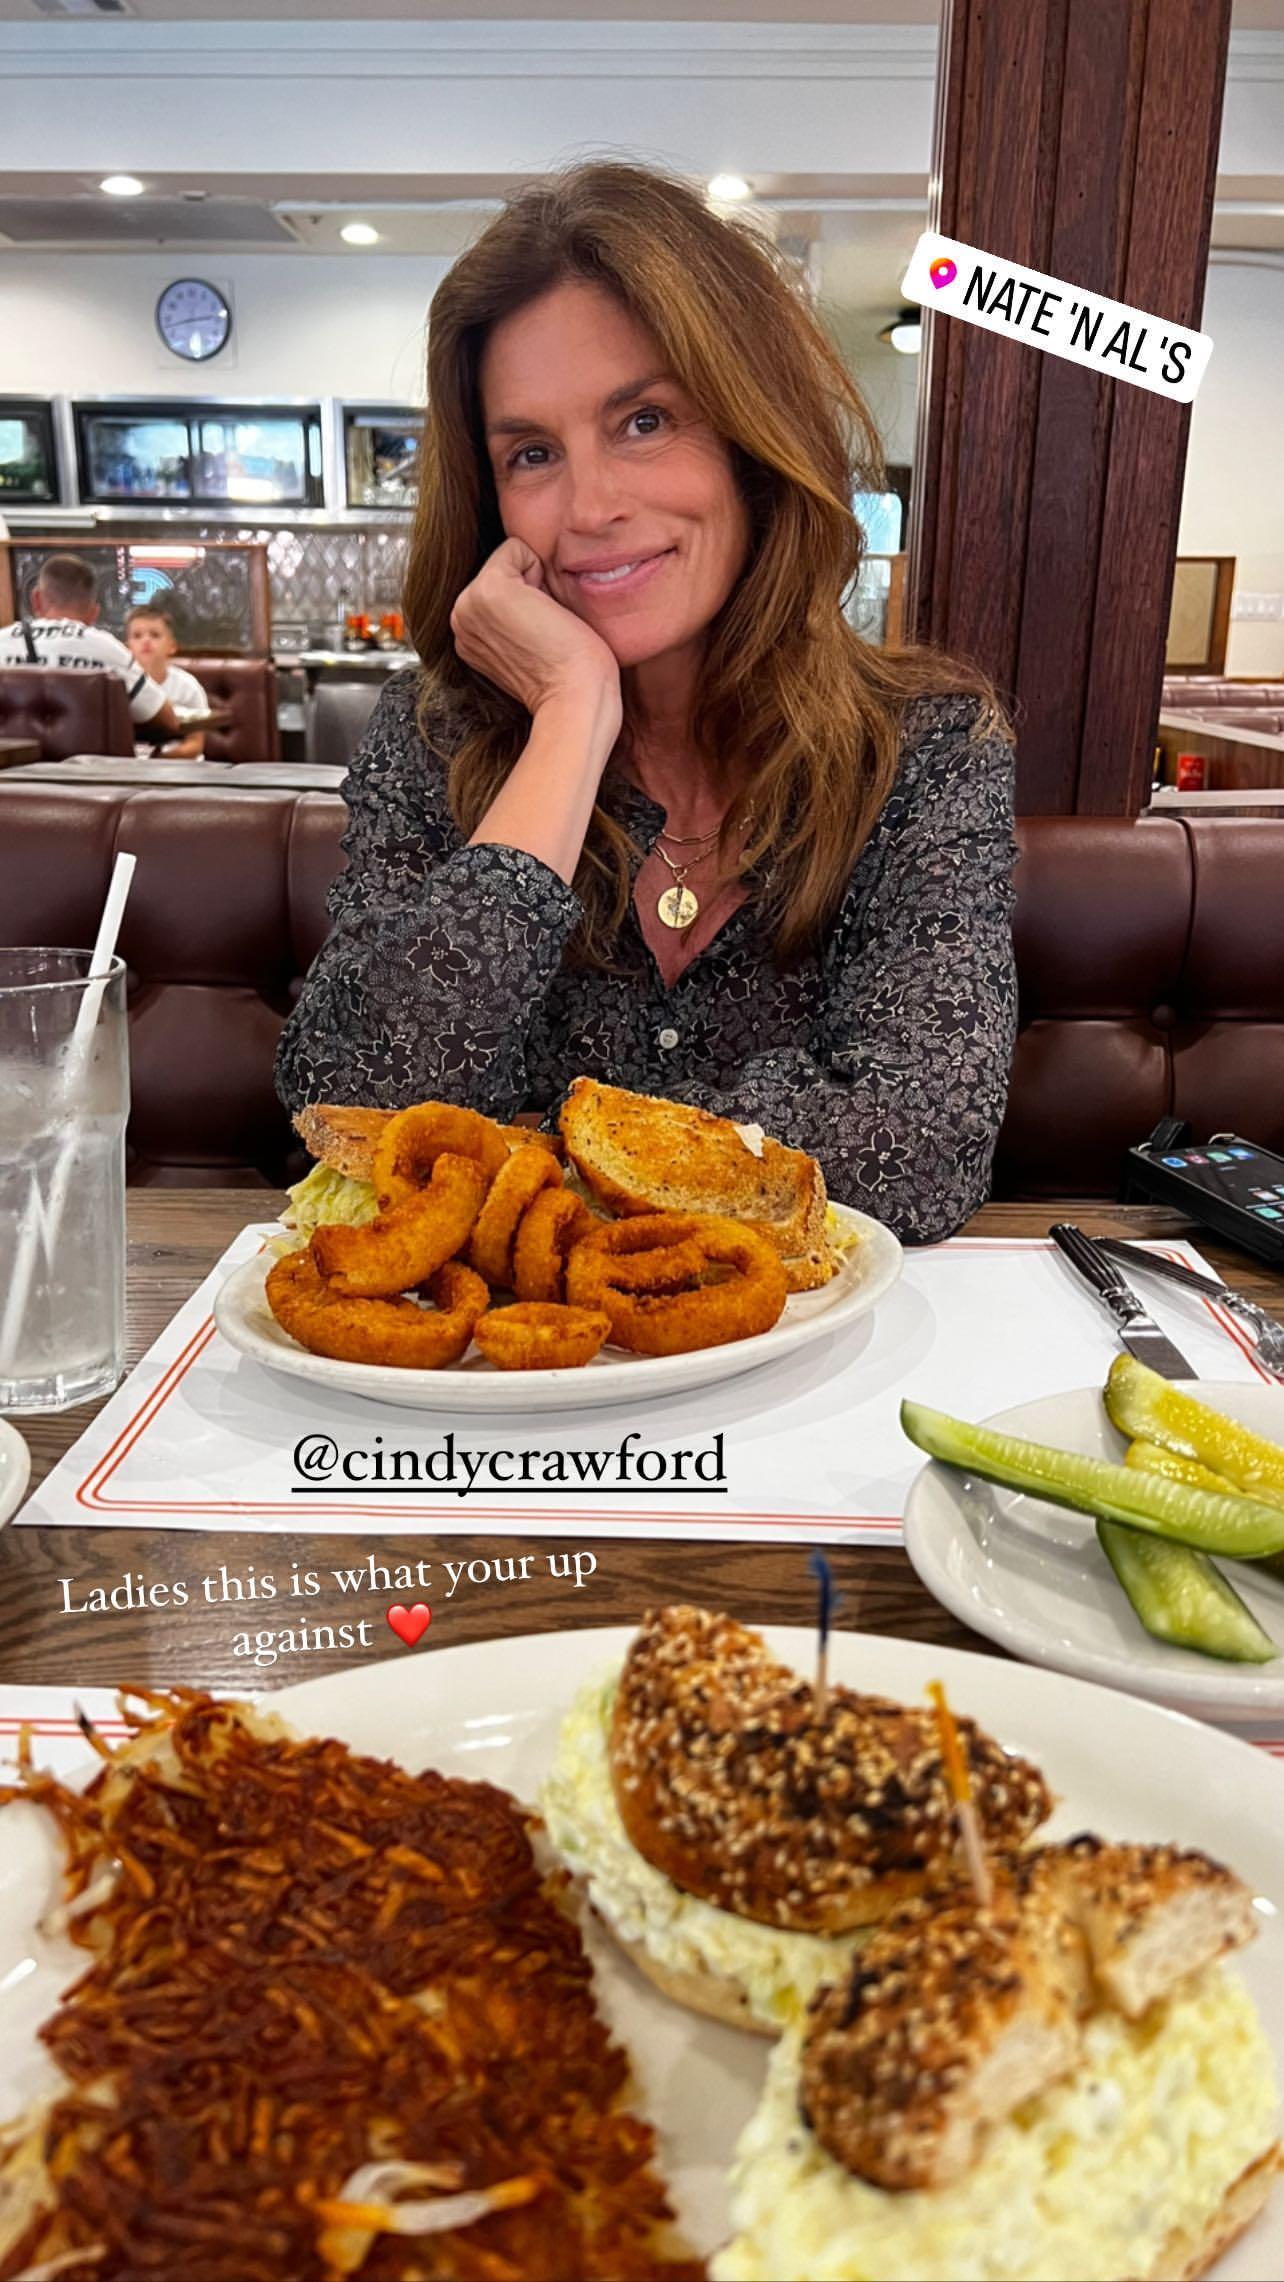 Cindy Crawford Looks Ageless In Makeup-Free Lunch Date With Her Son Presley Gerber